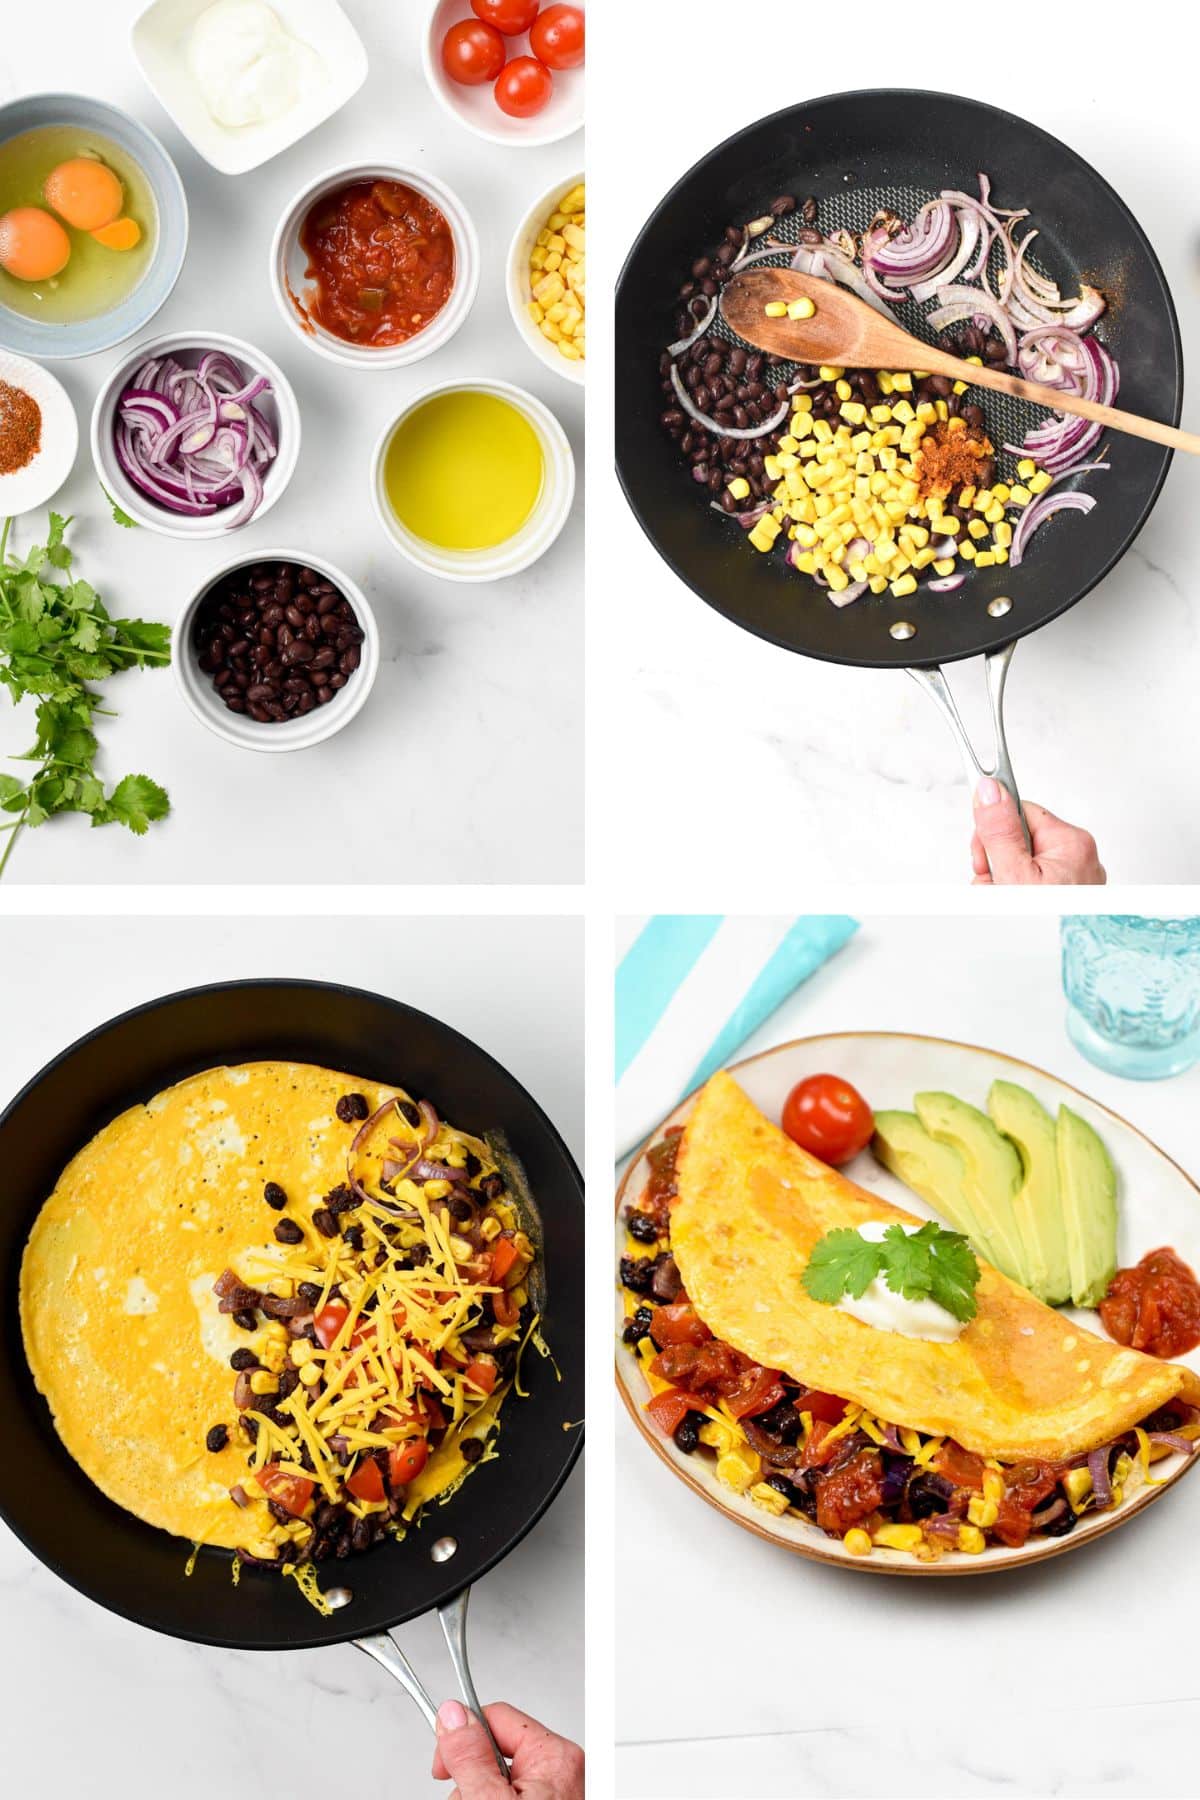 How to make Mexican Omelette